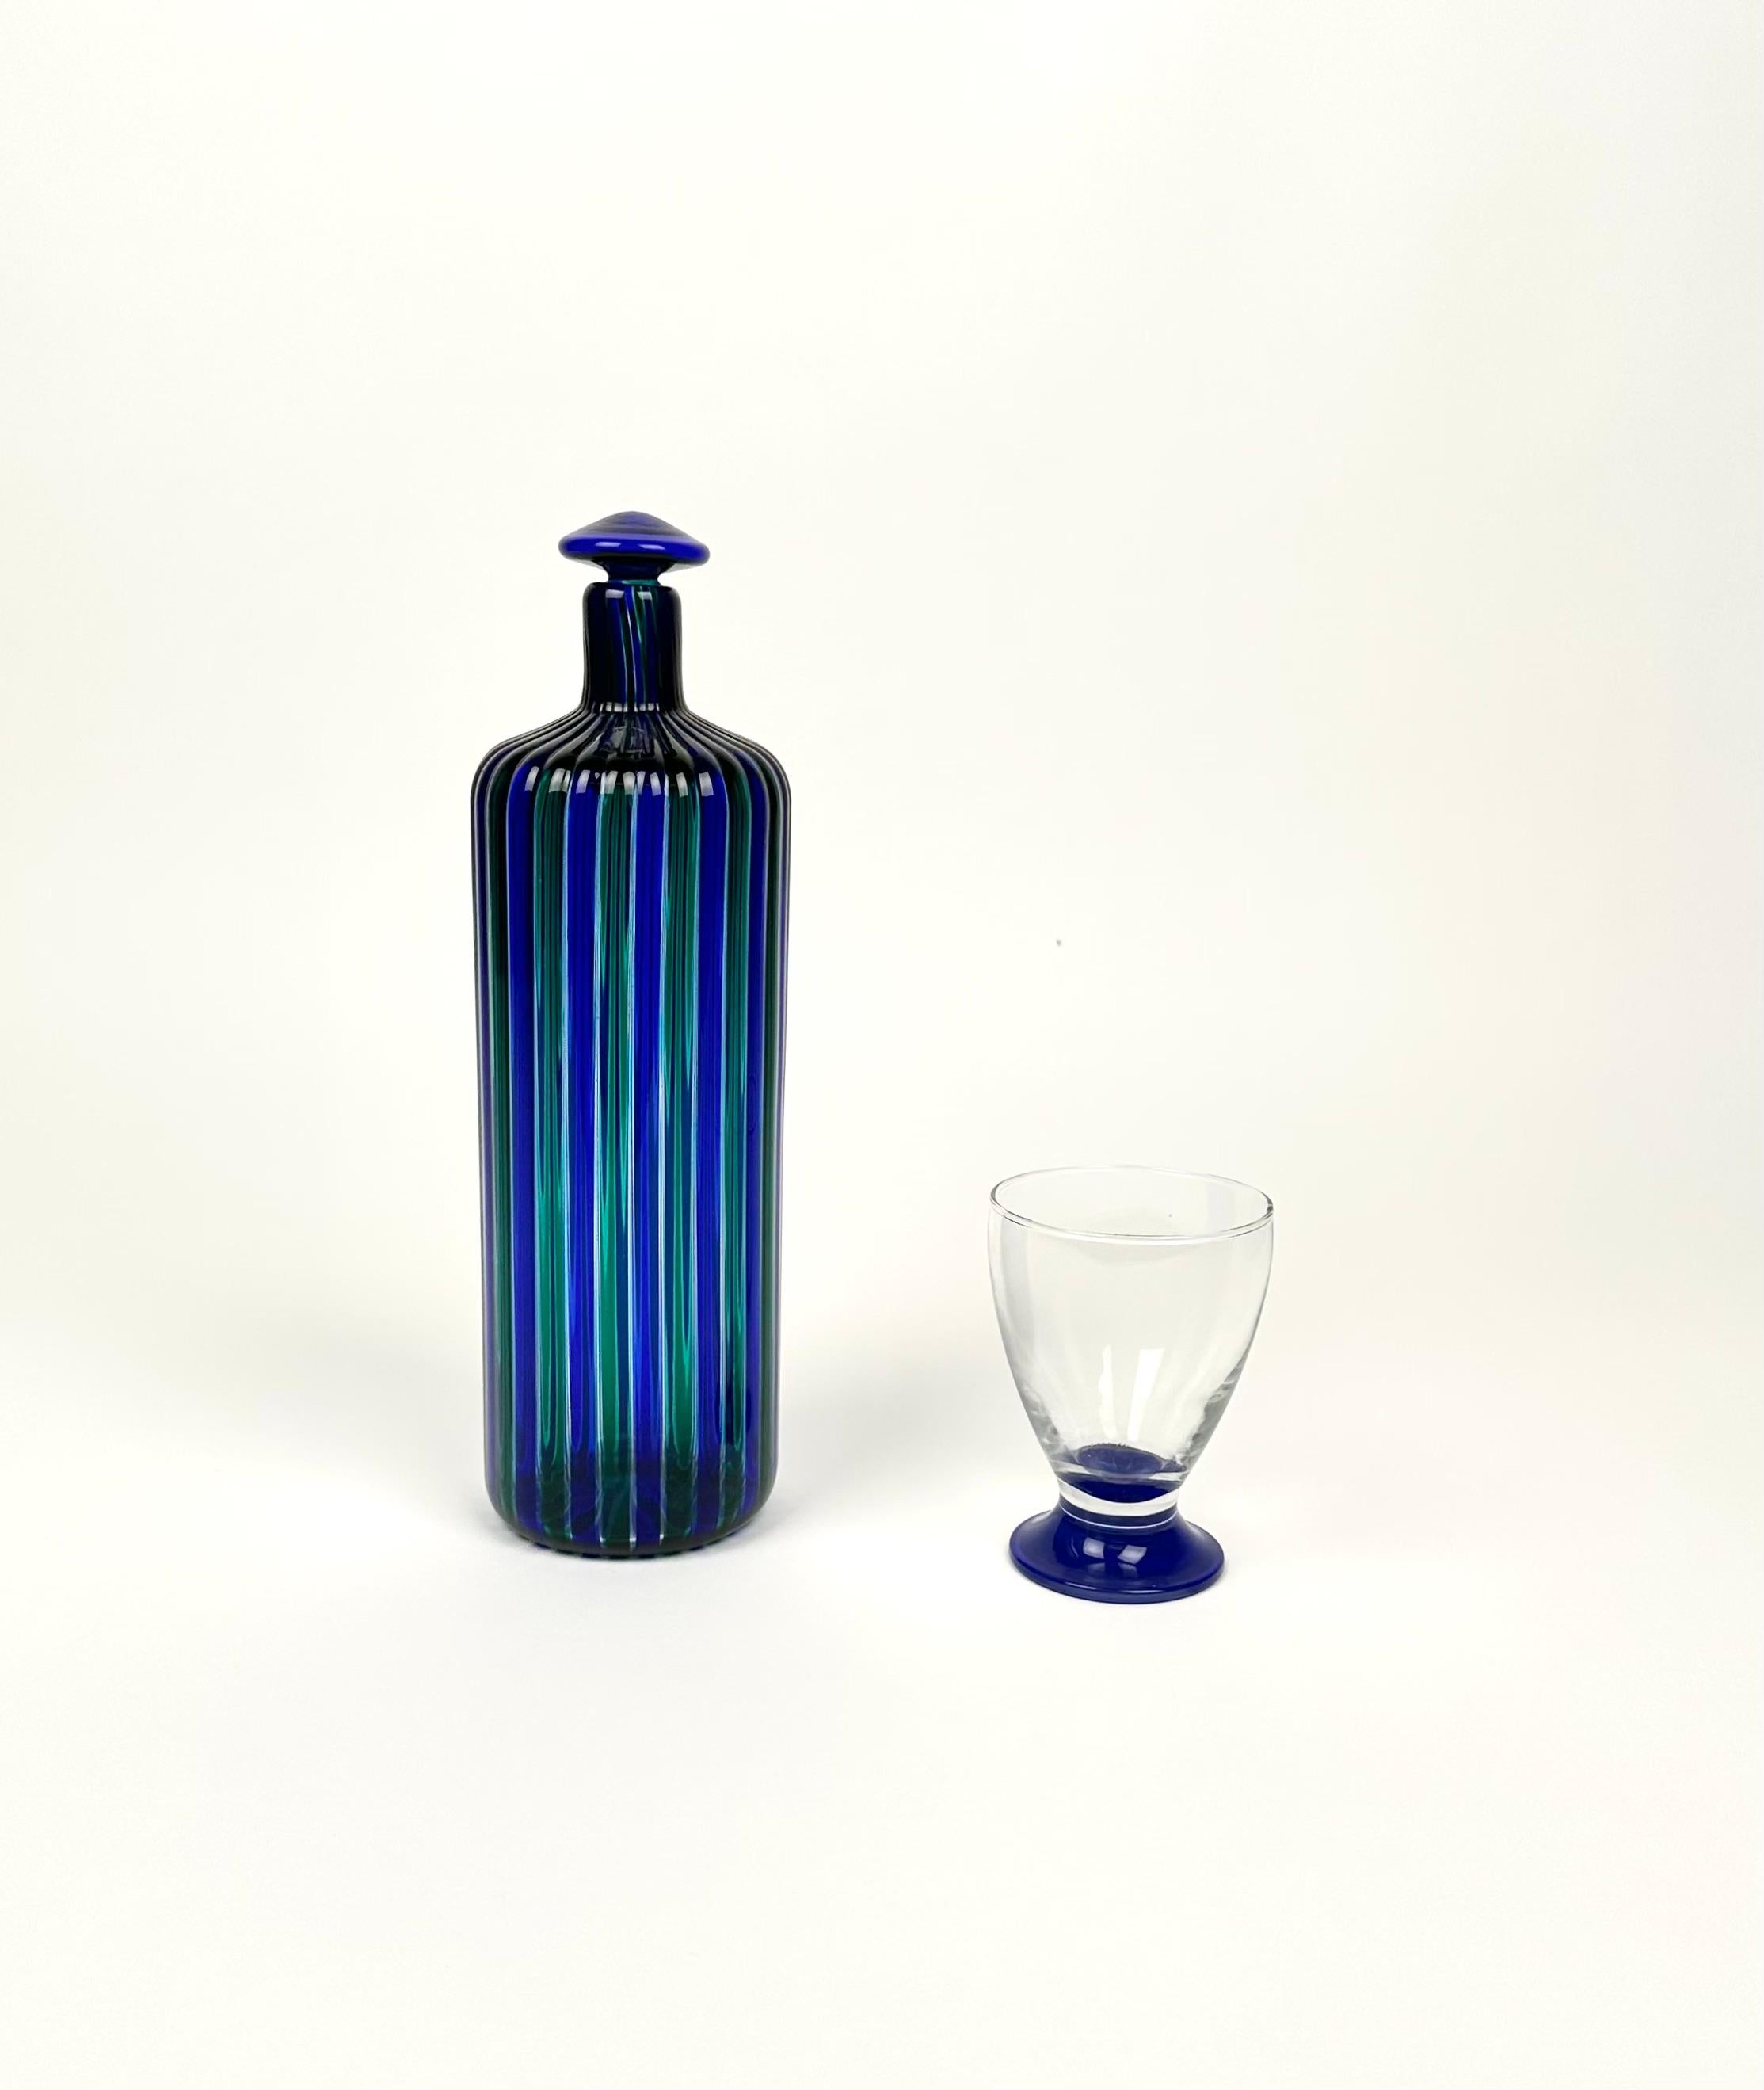 Mid-Century Modern Blue and Green Murano Glass Bottle by Fulvio Bianconi for Venini, Italy 1988 For Sale